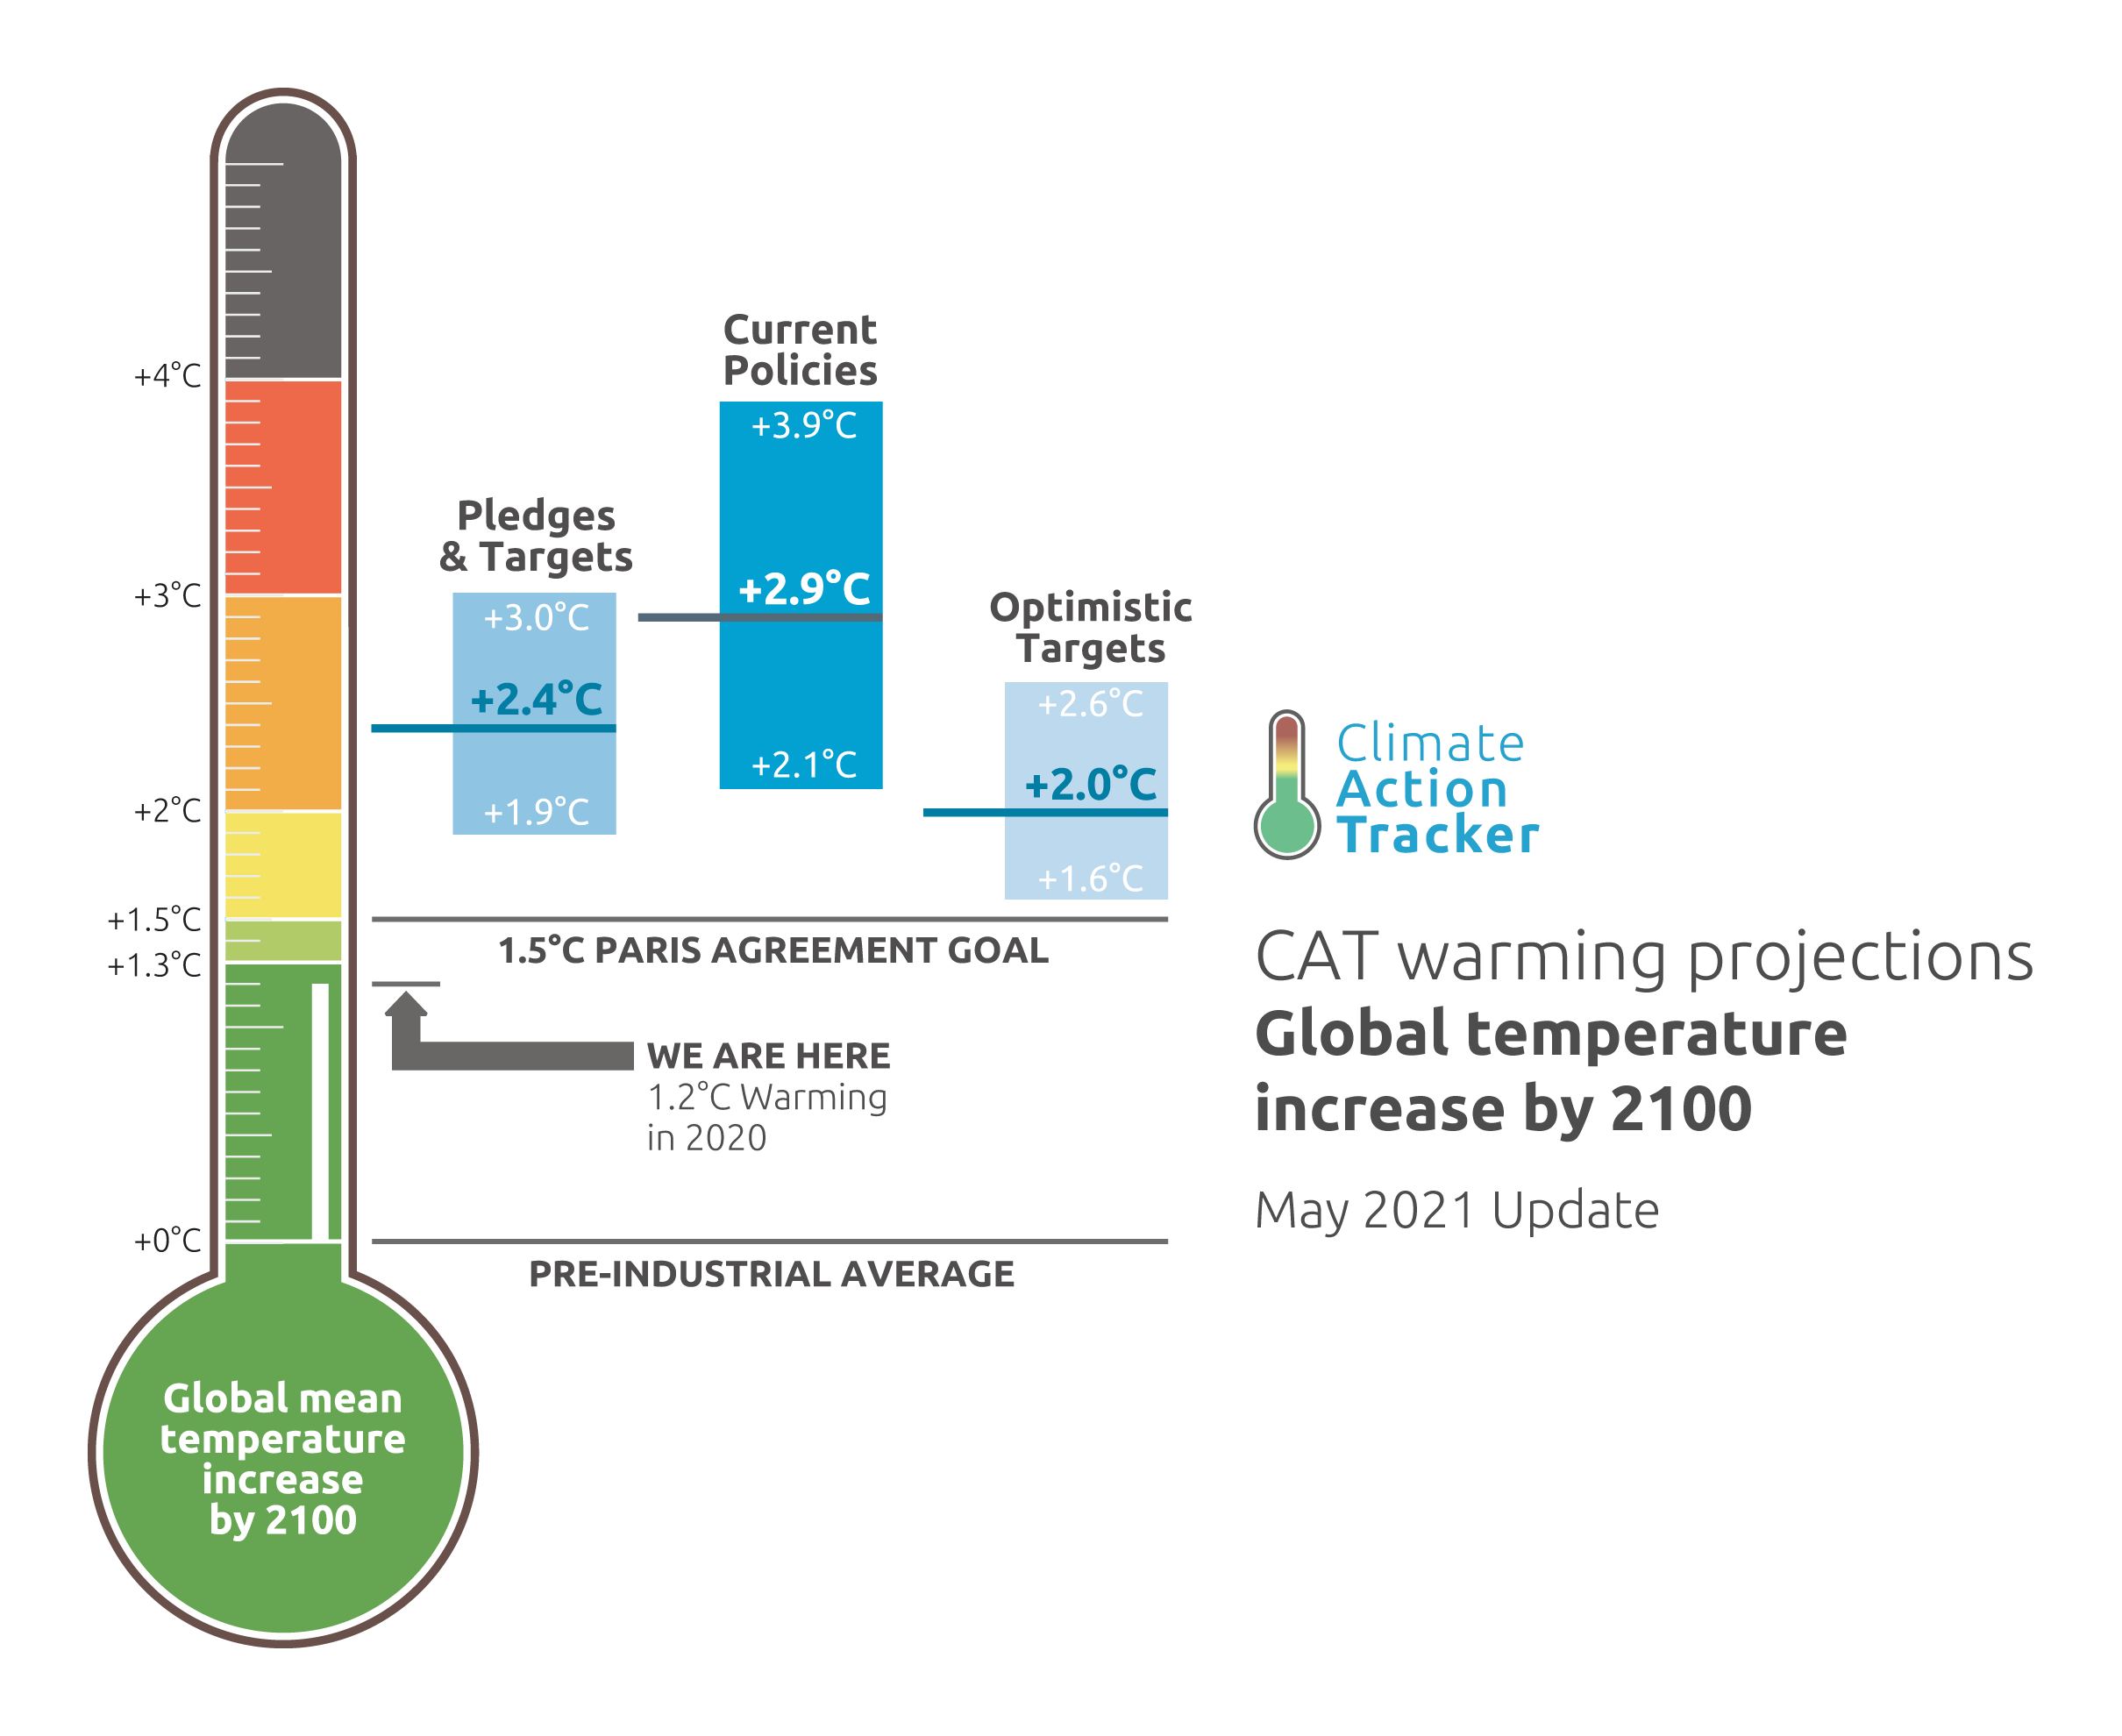 If all international climate pledges are successful, it might be possible to limit the rise in world temperatures to 2.0°C by the end of this century.